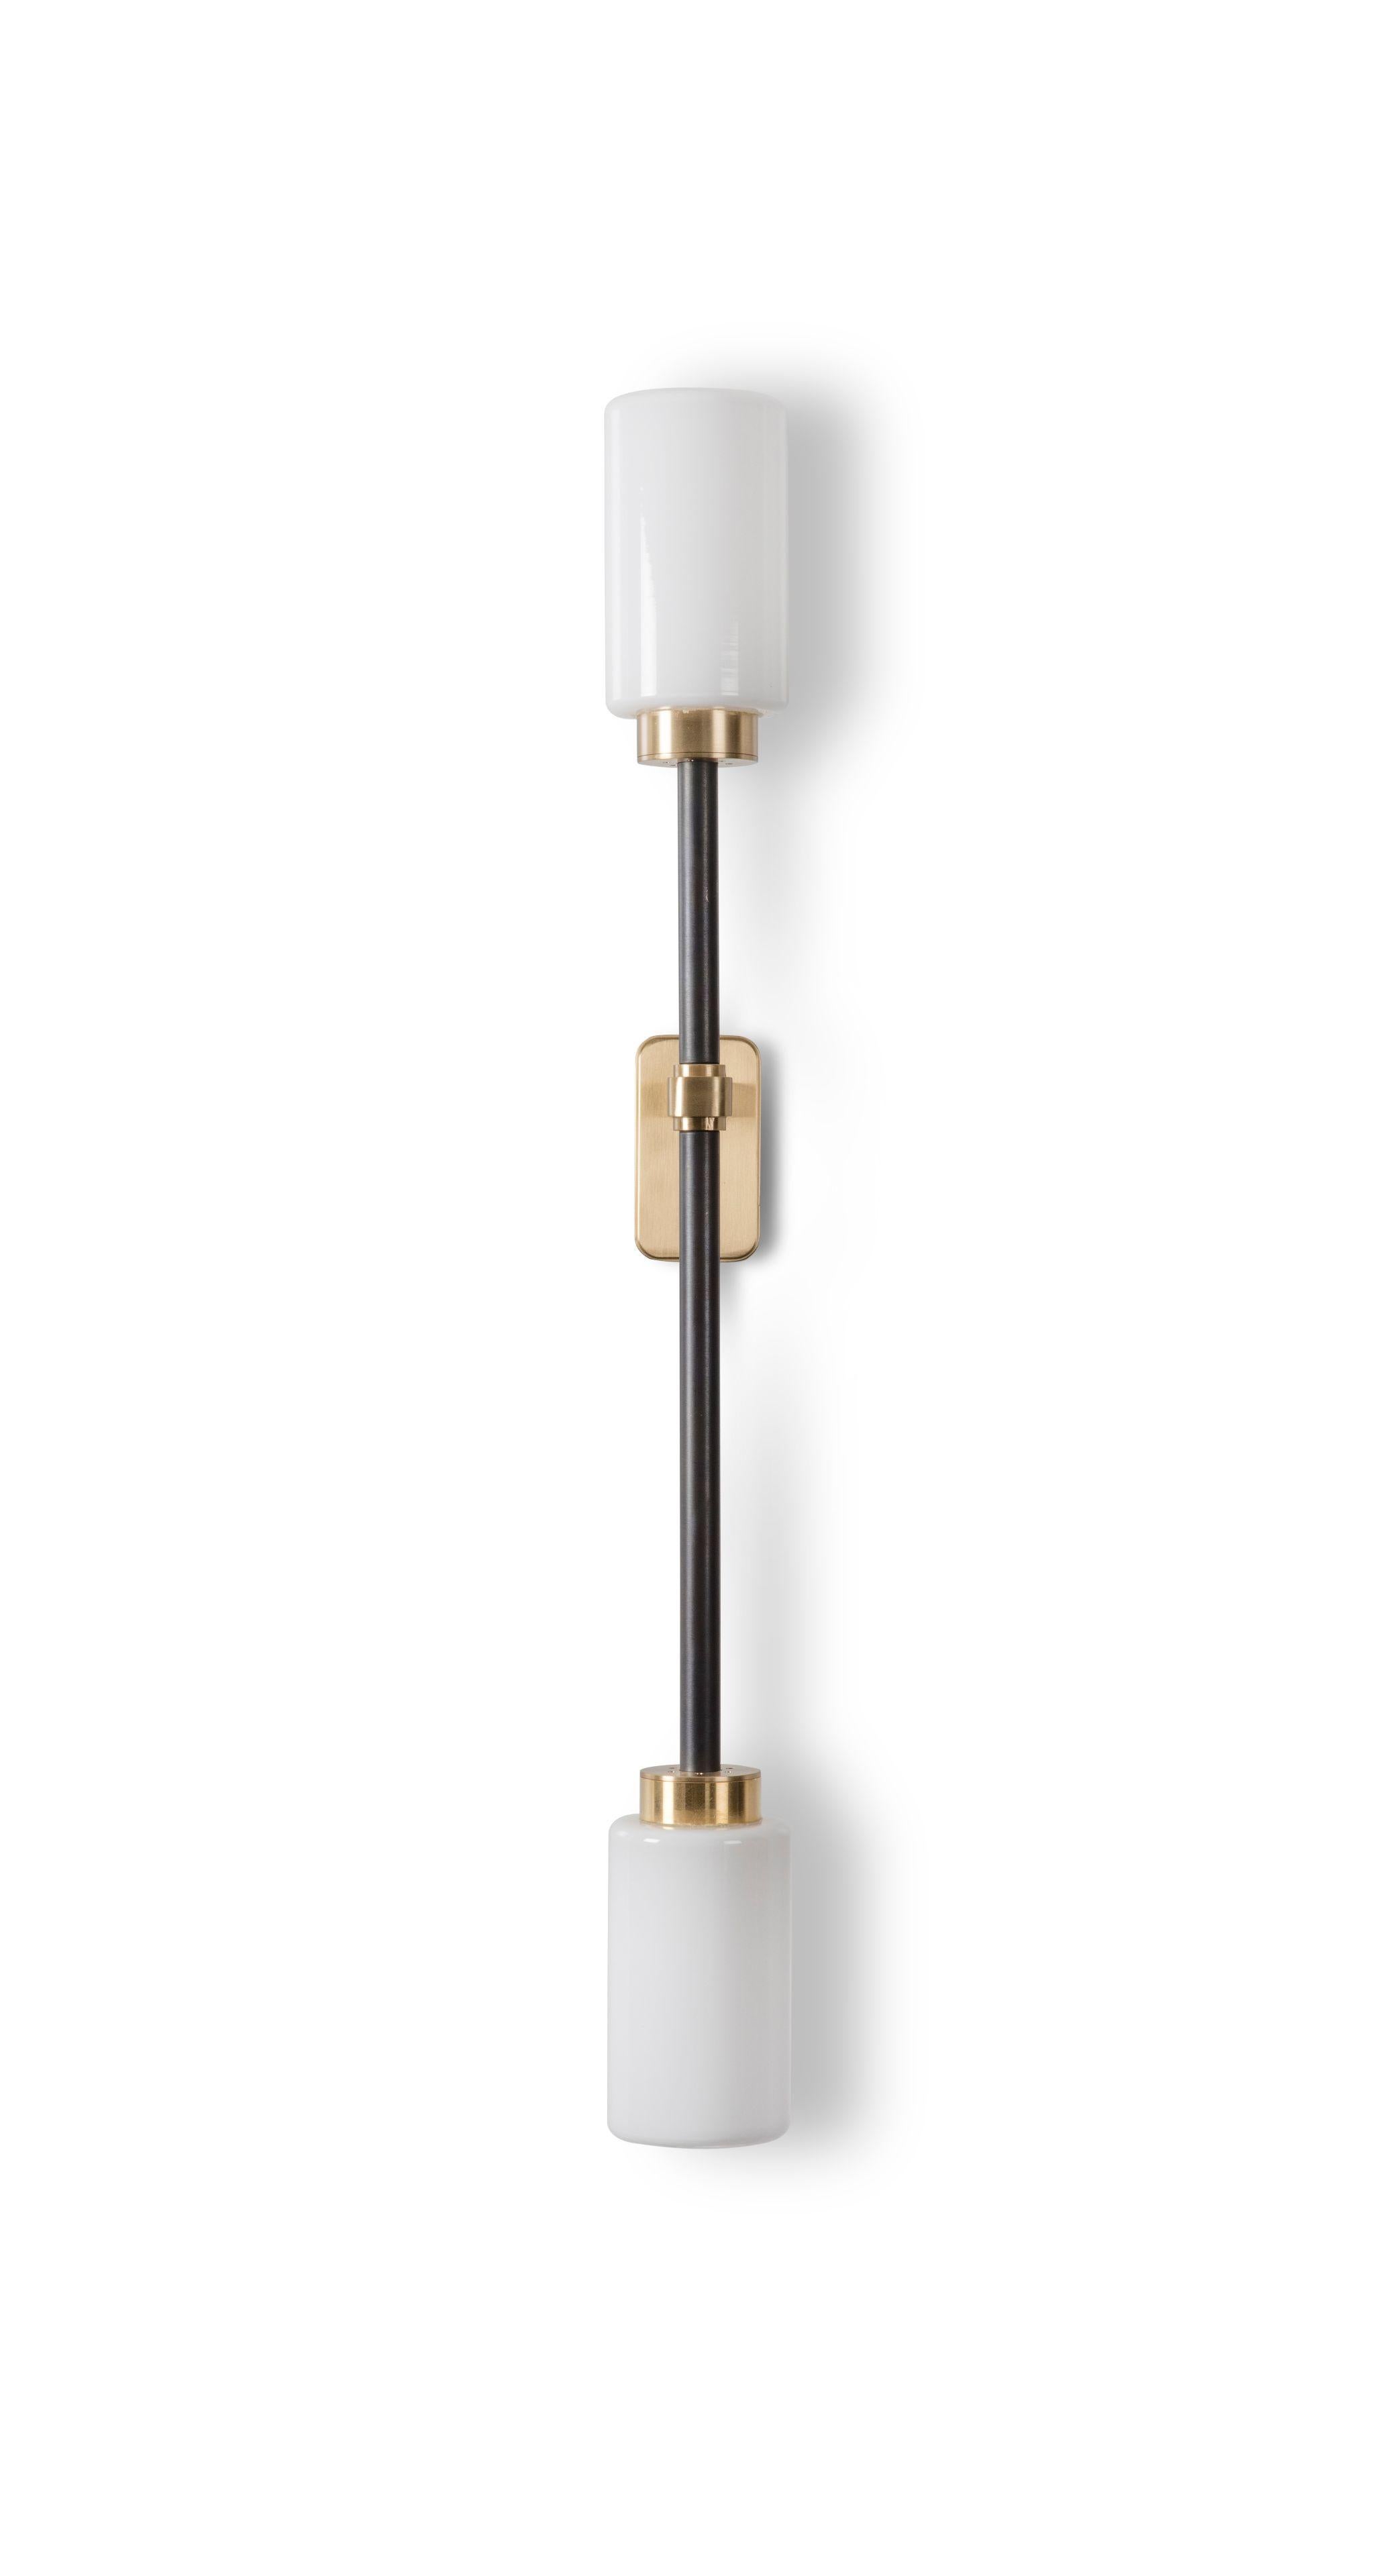 Opal Farol single wall light by Bert Frank
Dimensions: H 66 x W 10.5 x D 7 cm
Materials: Brass, bronze and opal

Available finishes: Bronzed brass, black brass
All our lamps can be wired according to each country. If sold to the USA it will be